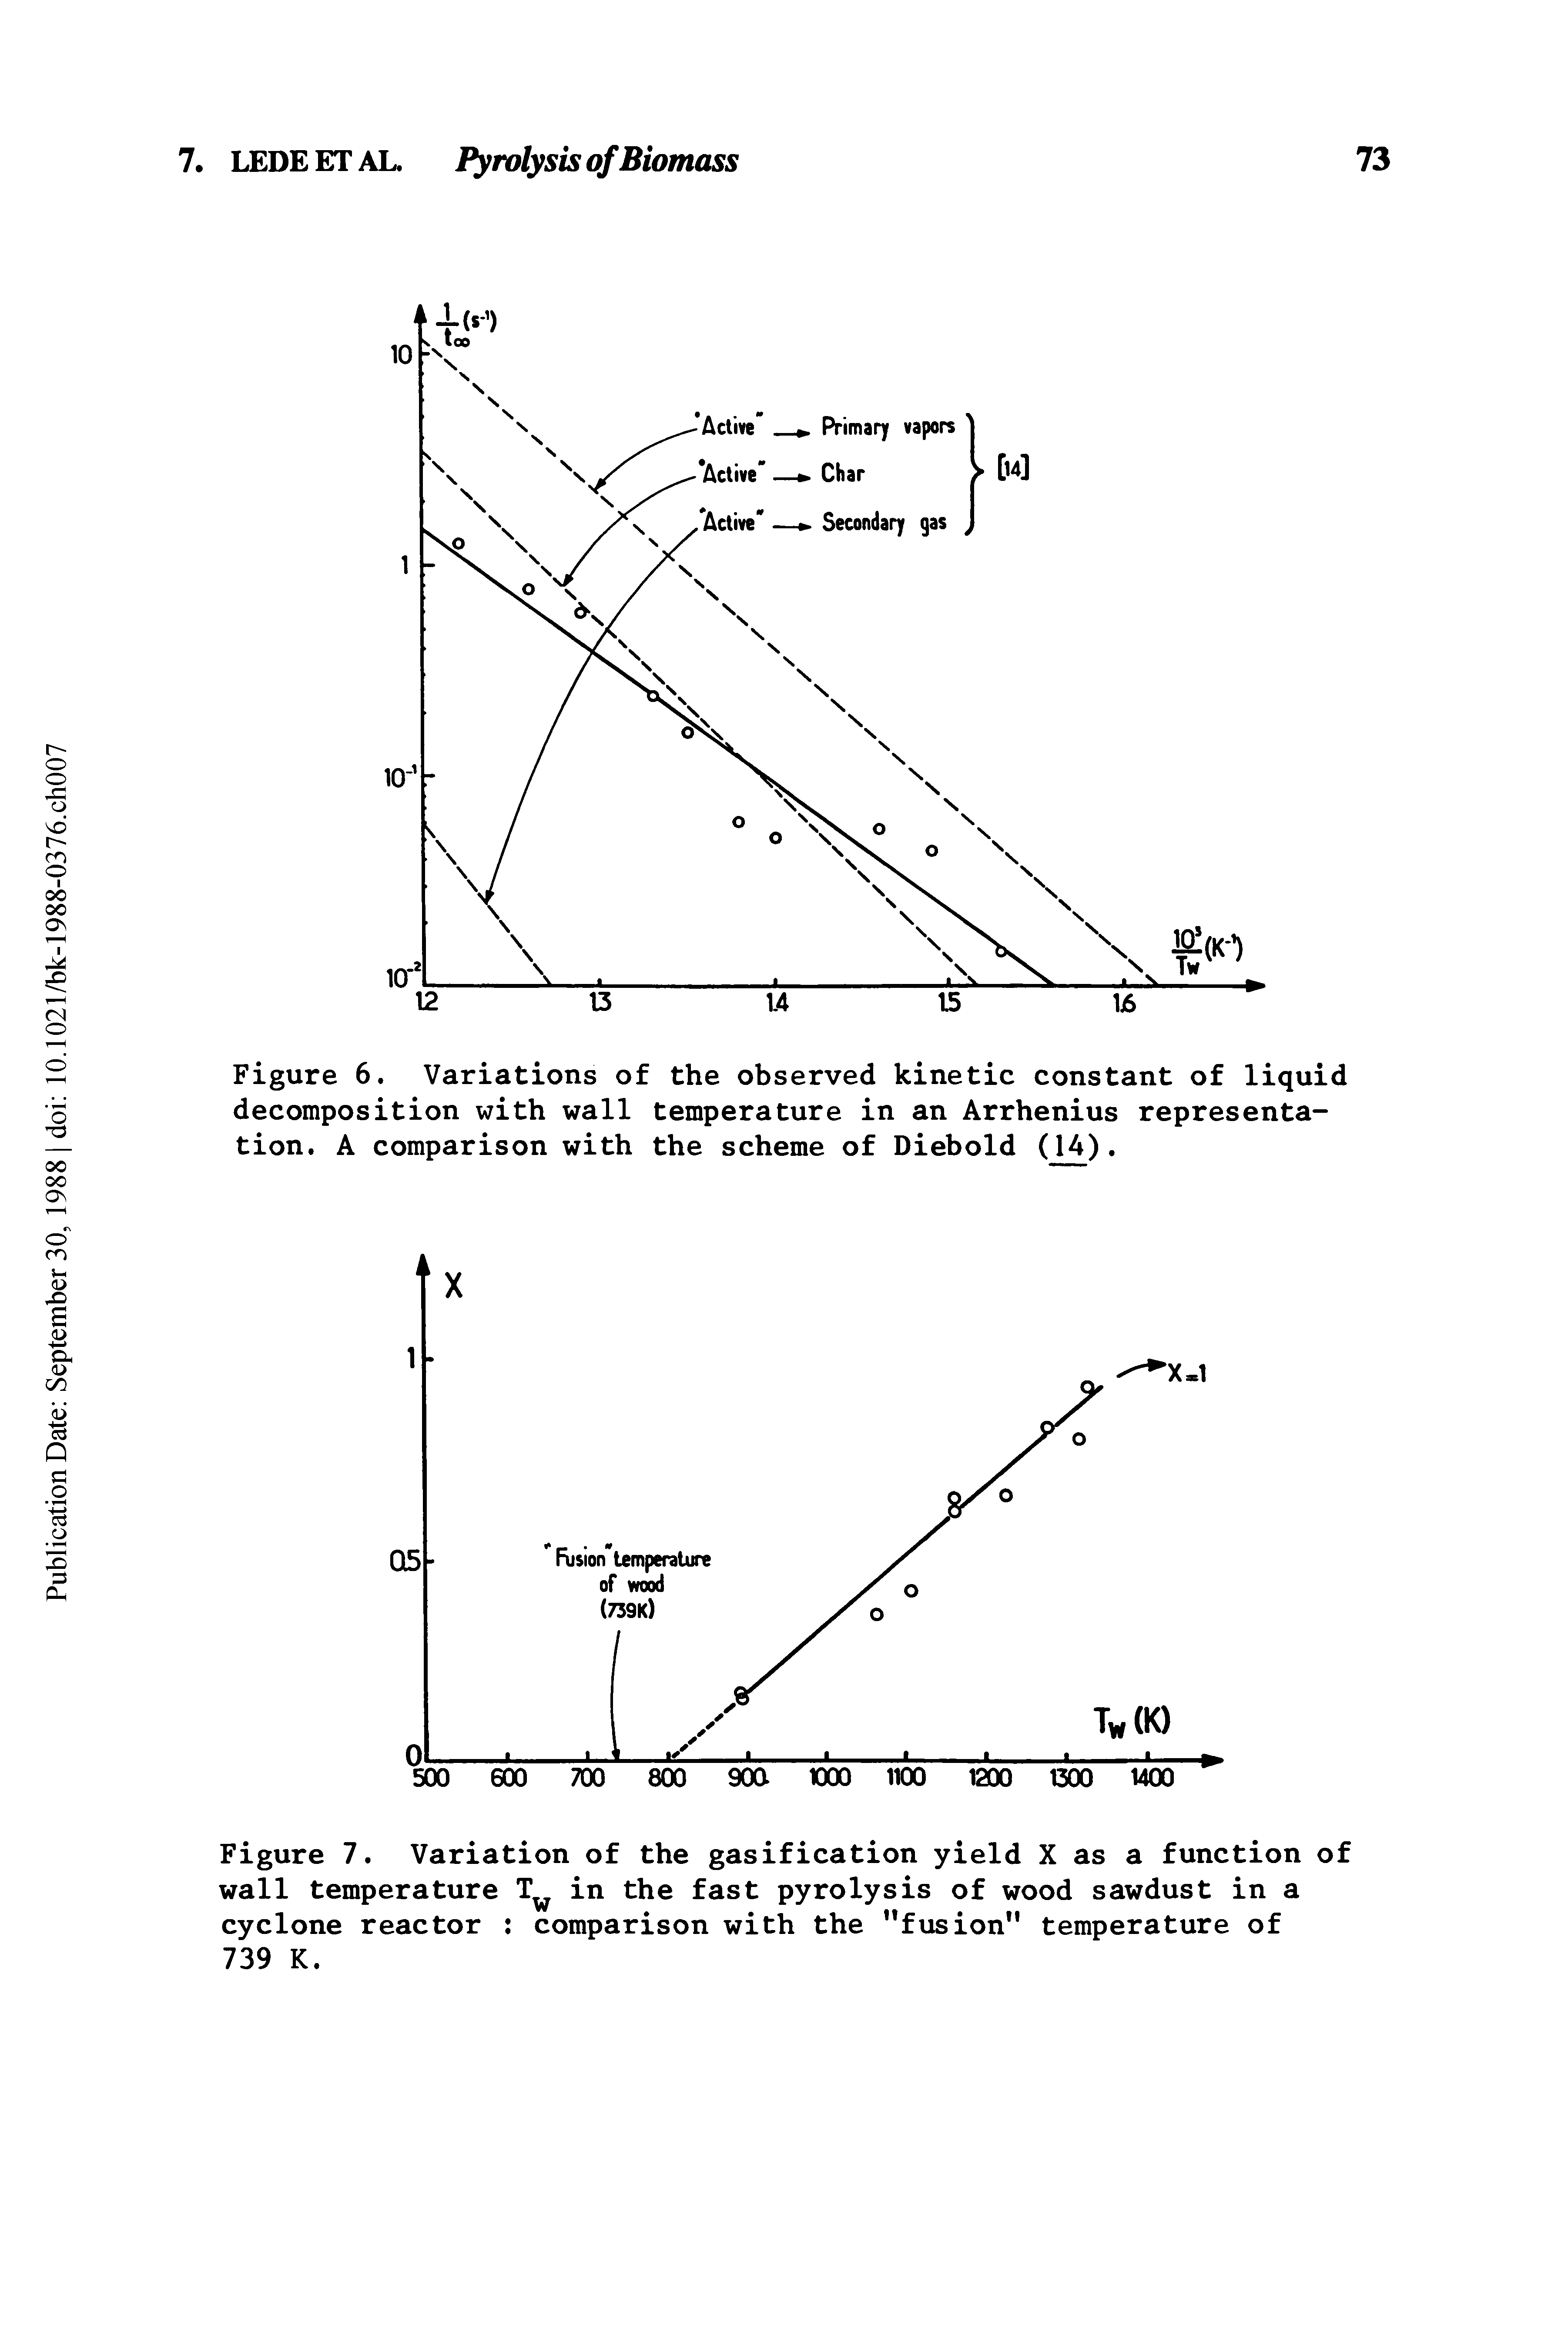 Figure 7. Variation of the gasification yield X as a function of wall temperature in the fast pyrolysis of wood sawdust in a cyclone reactor comparison with the fusion" temperature of 739 K.